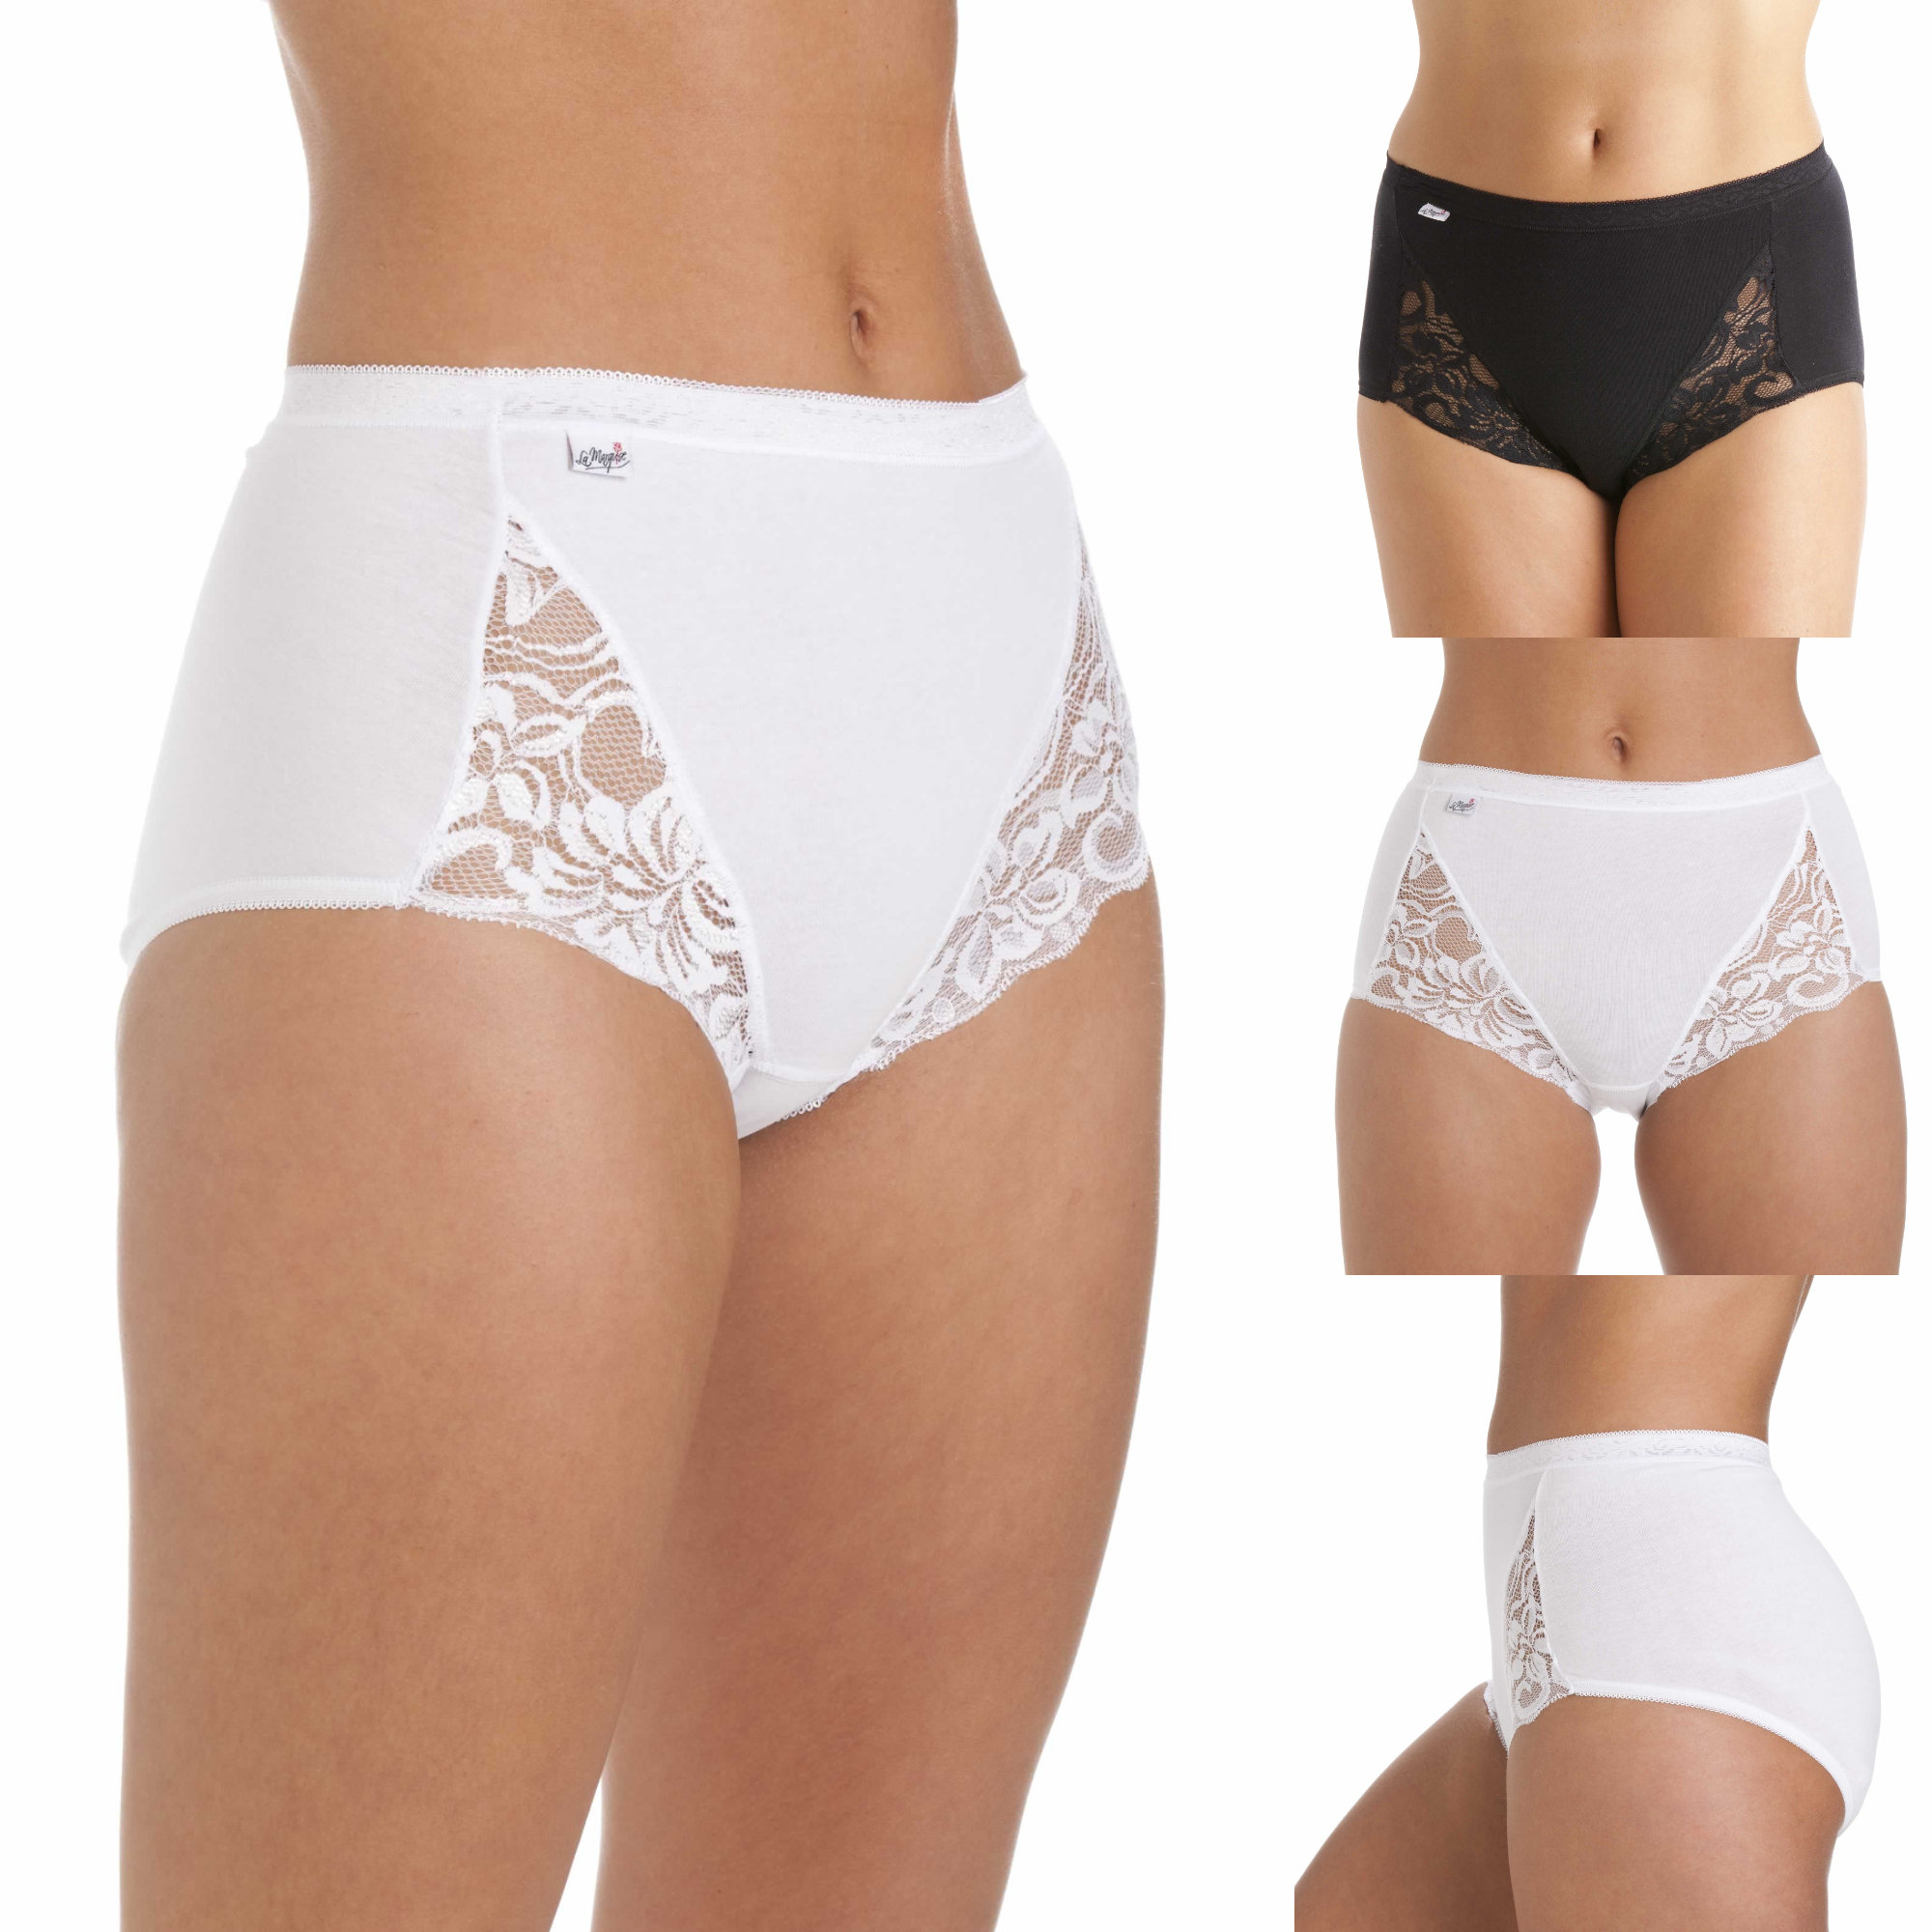 Rovga High Waisted Thong Comfortable Cotton Underwear For India